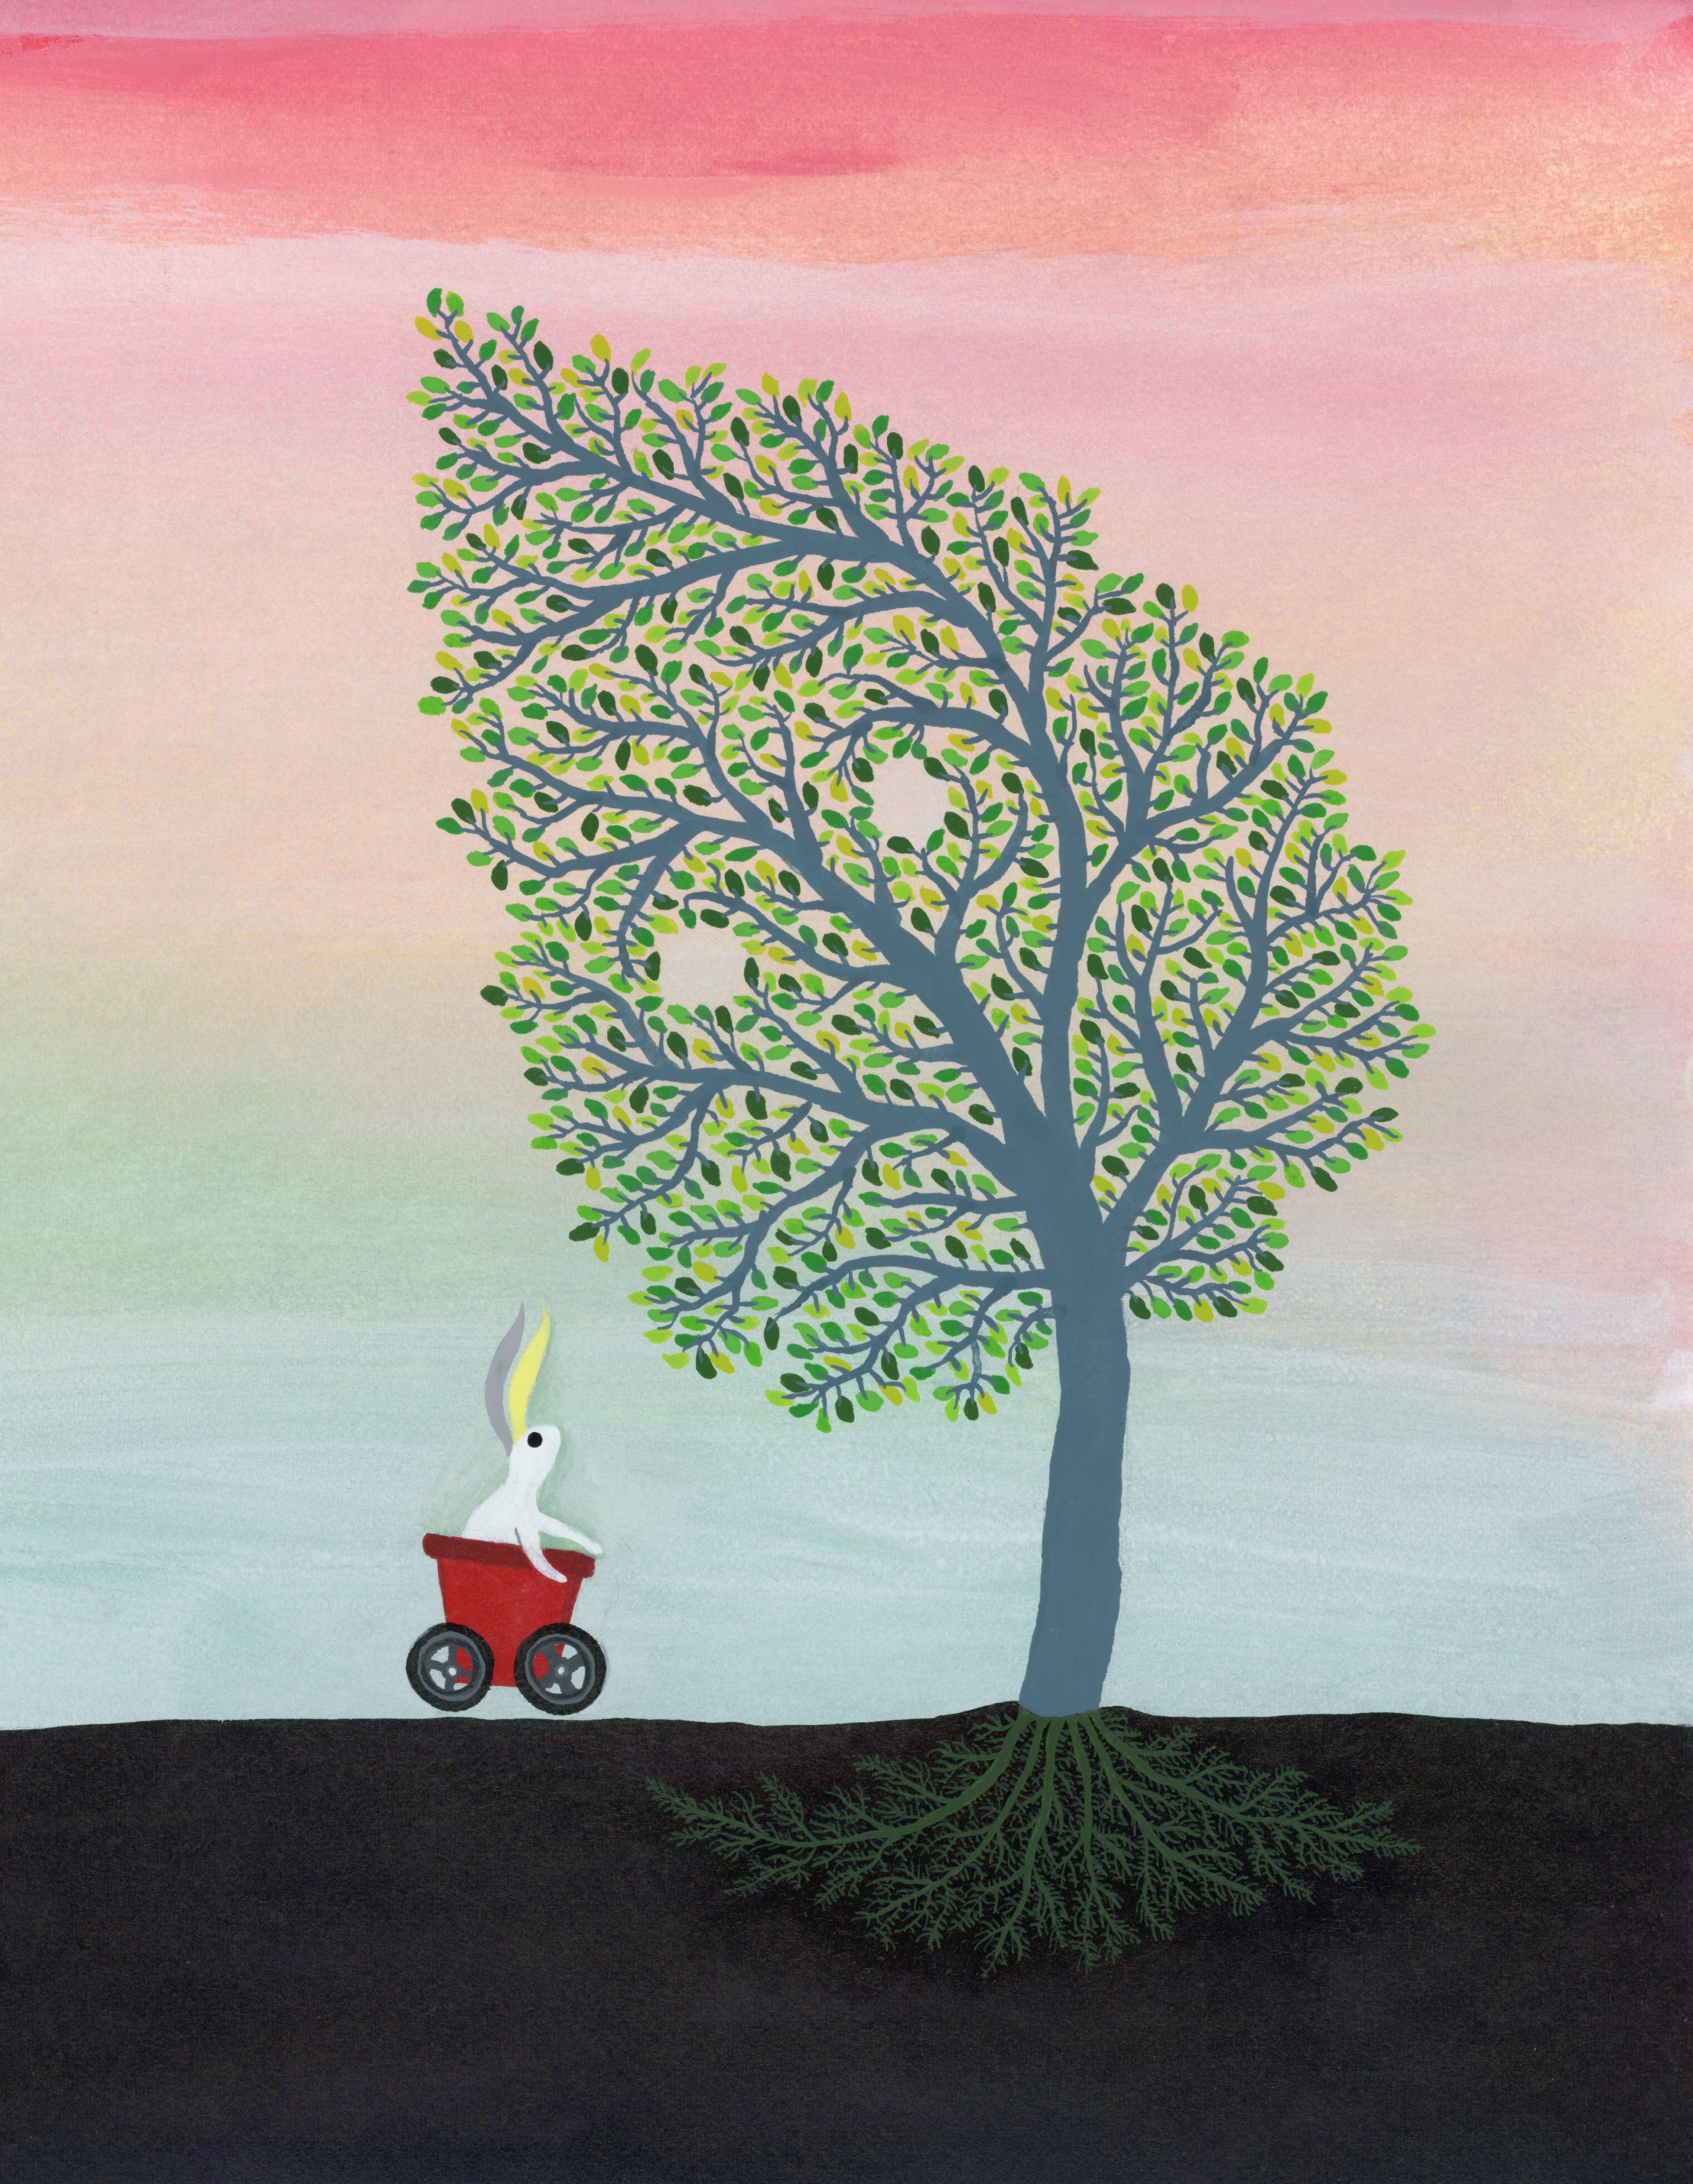 A white bunny in a small red cart looking up at a tree with green leaves, against a pink sky.